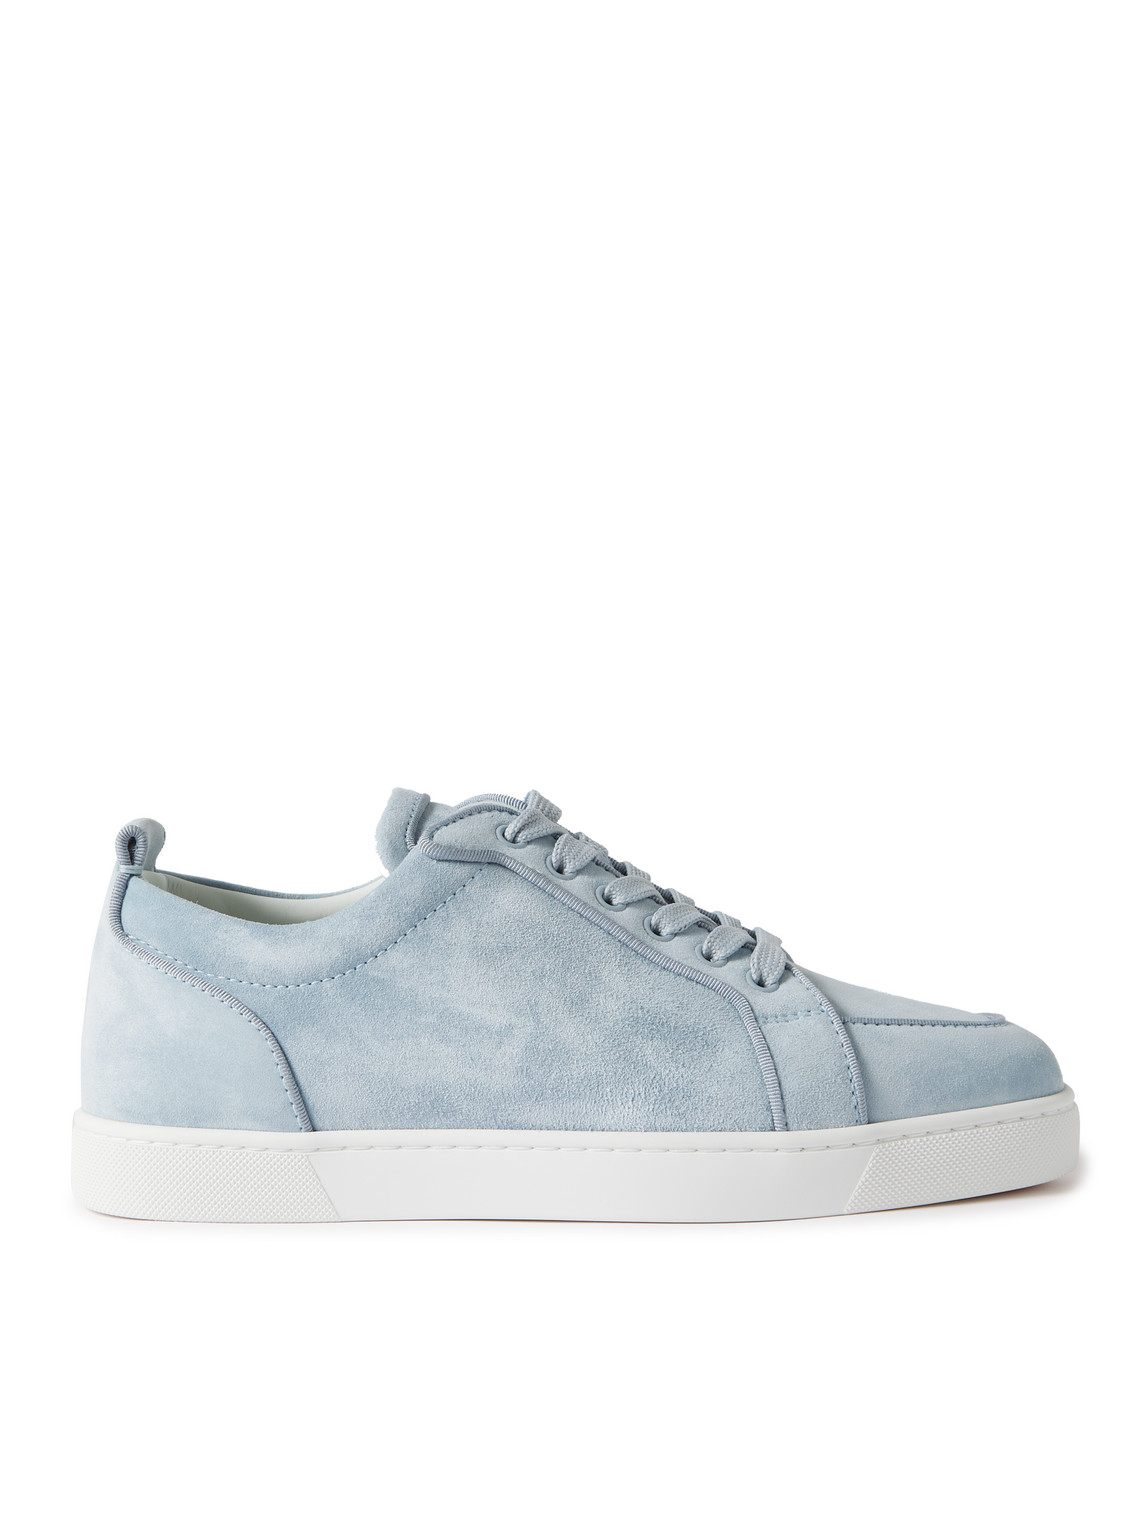 Christian Louboutin Rantulow Suede Trainers In Blue